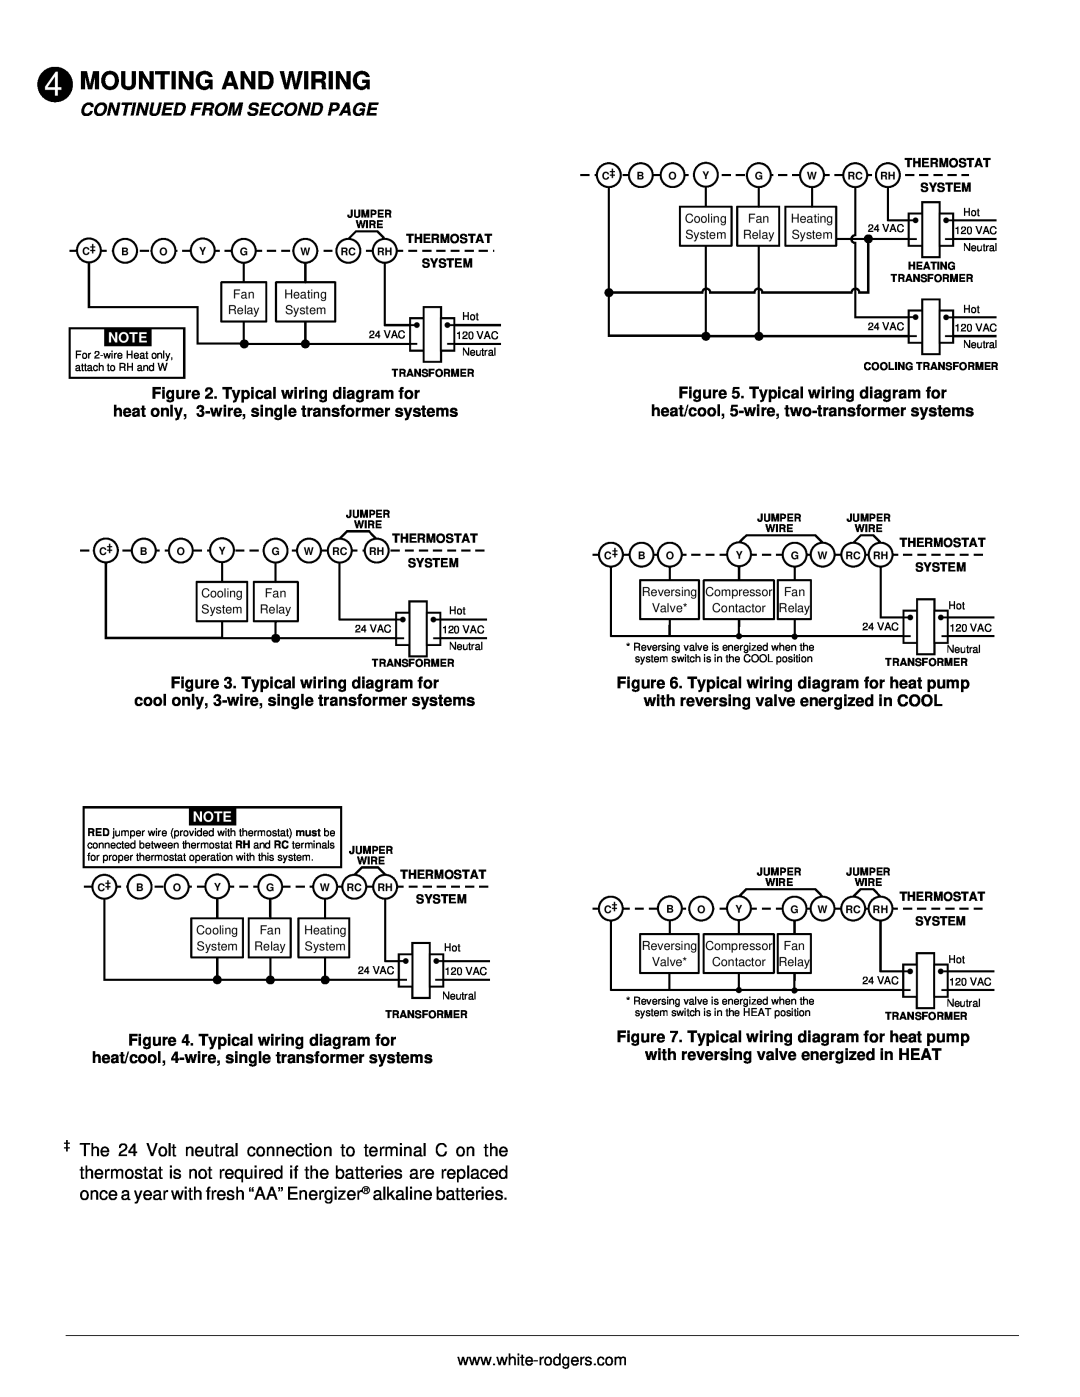 Emerson 850 installation instructions Continued From Second Page, Mounting And Wiring 